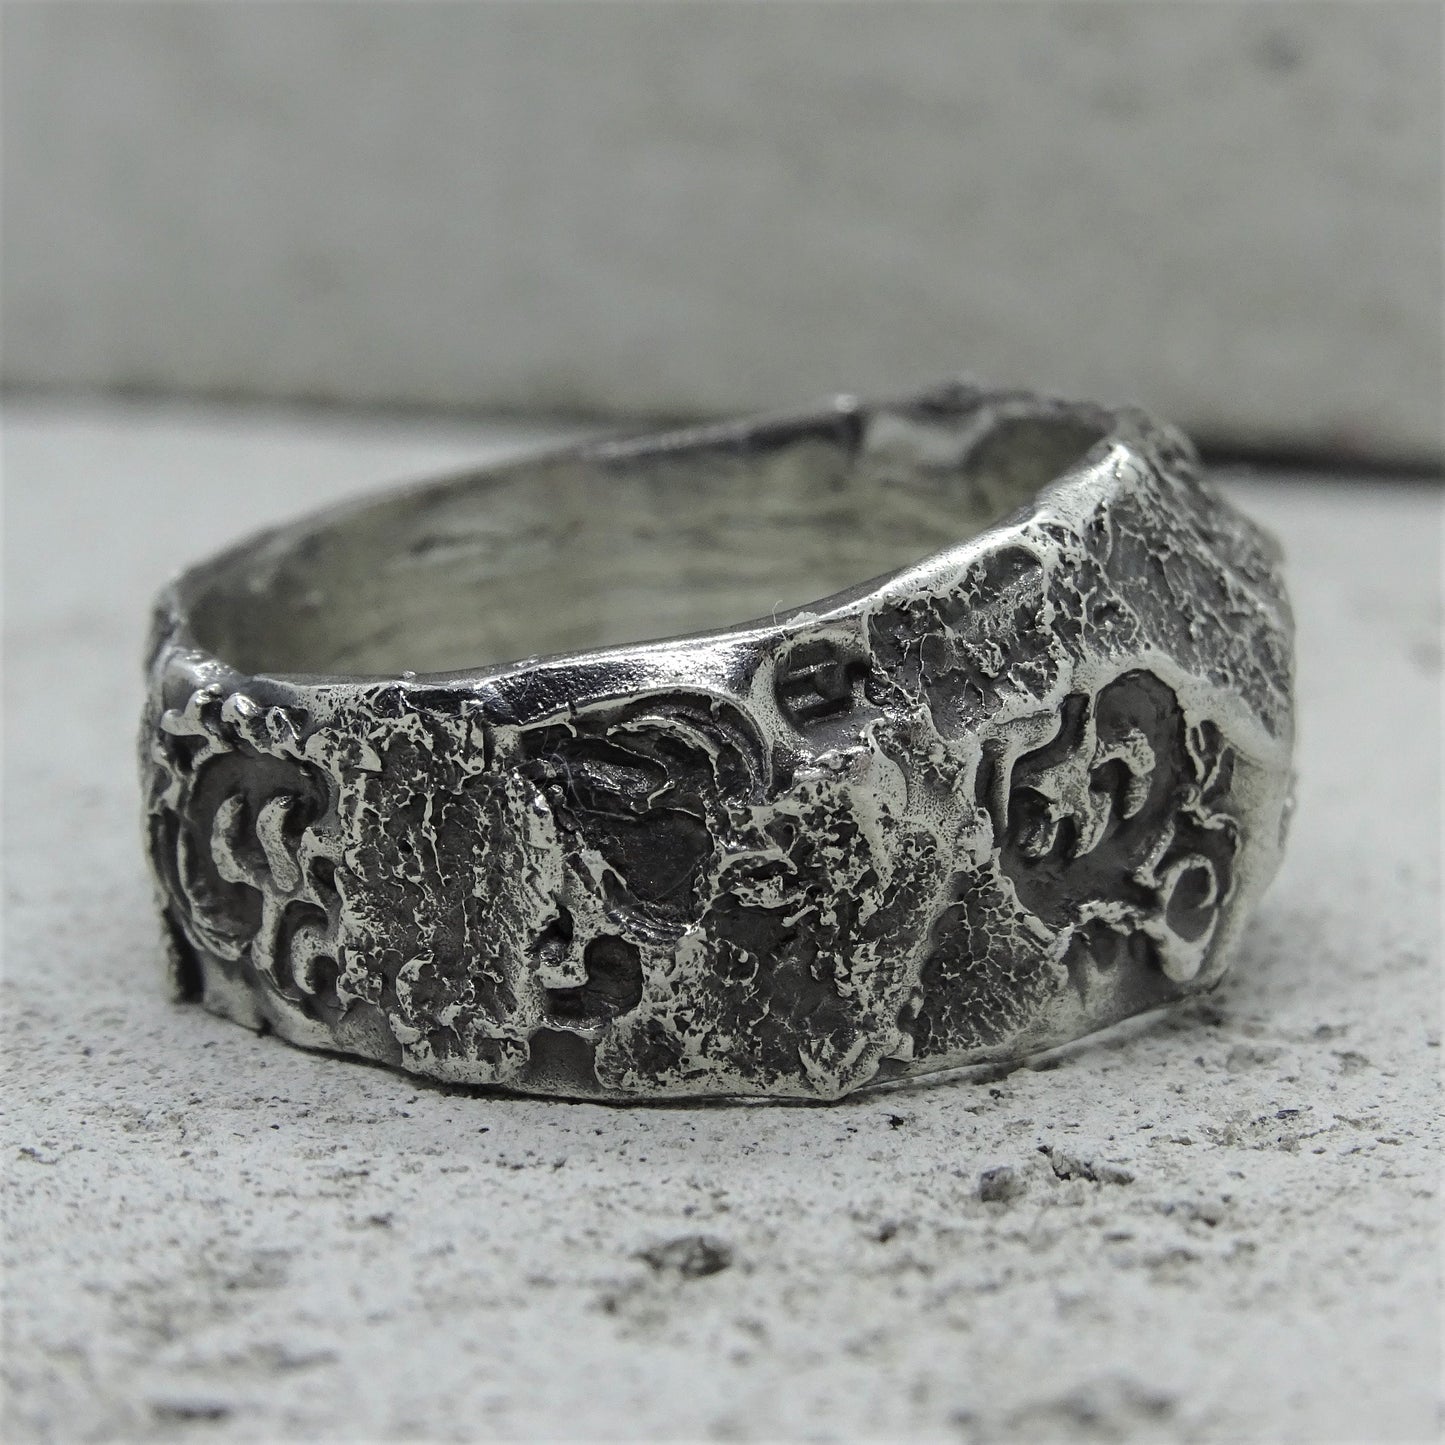 Modern ring- An elegant ring with a unique texture and floral patterns Rings with patterns Project50g 